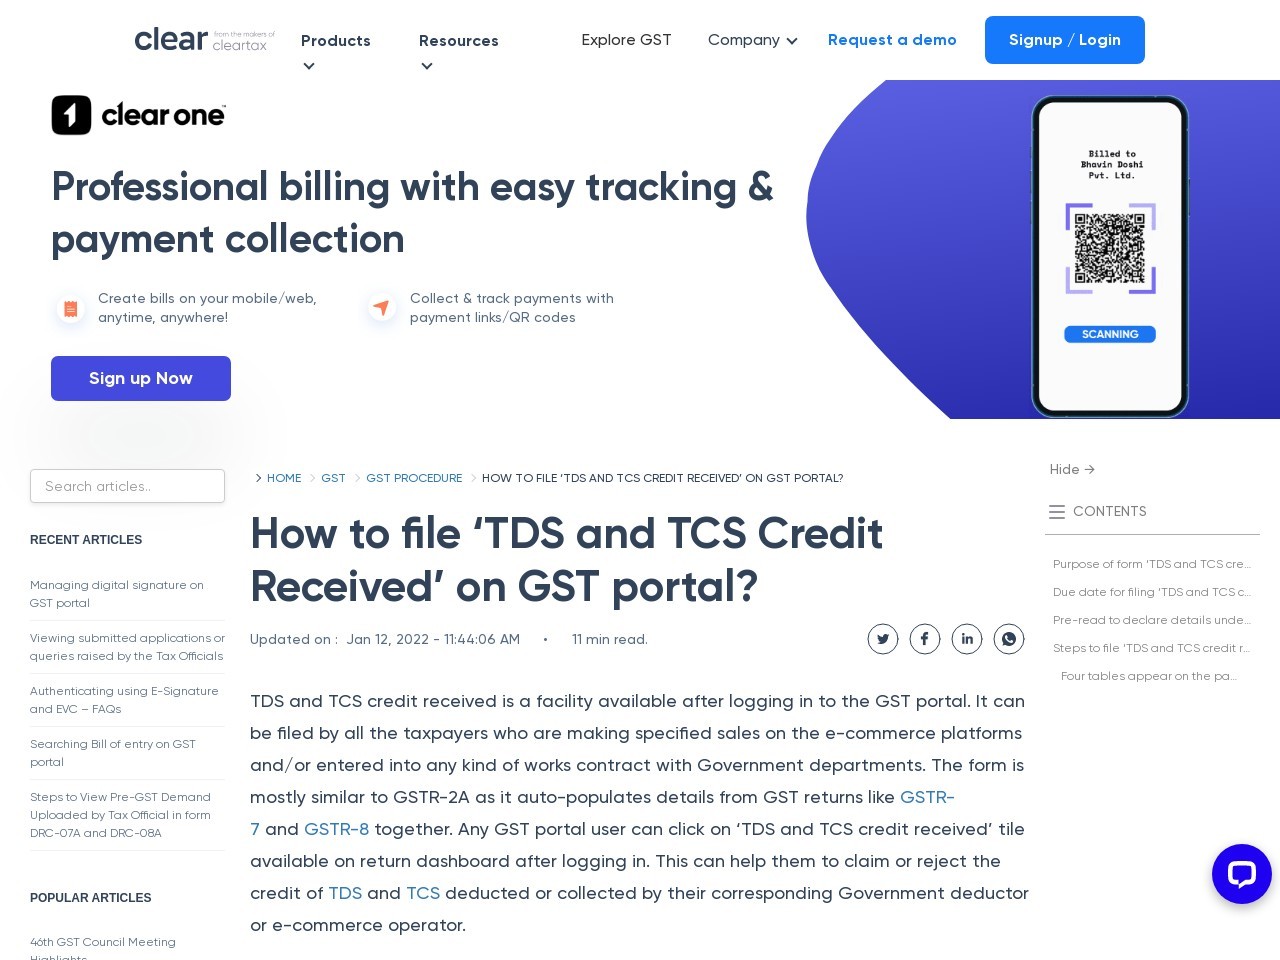 TDS and TCS Credit received on GST portal: Filing and FAQs